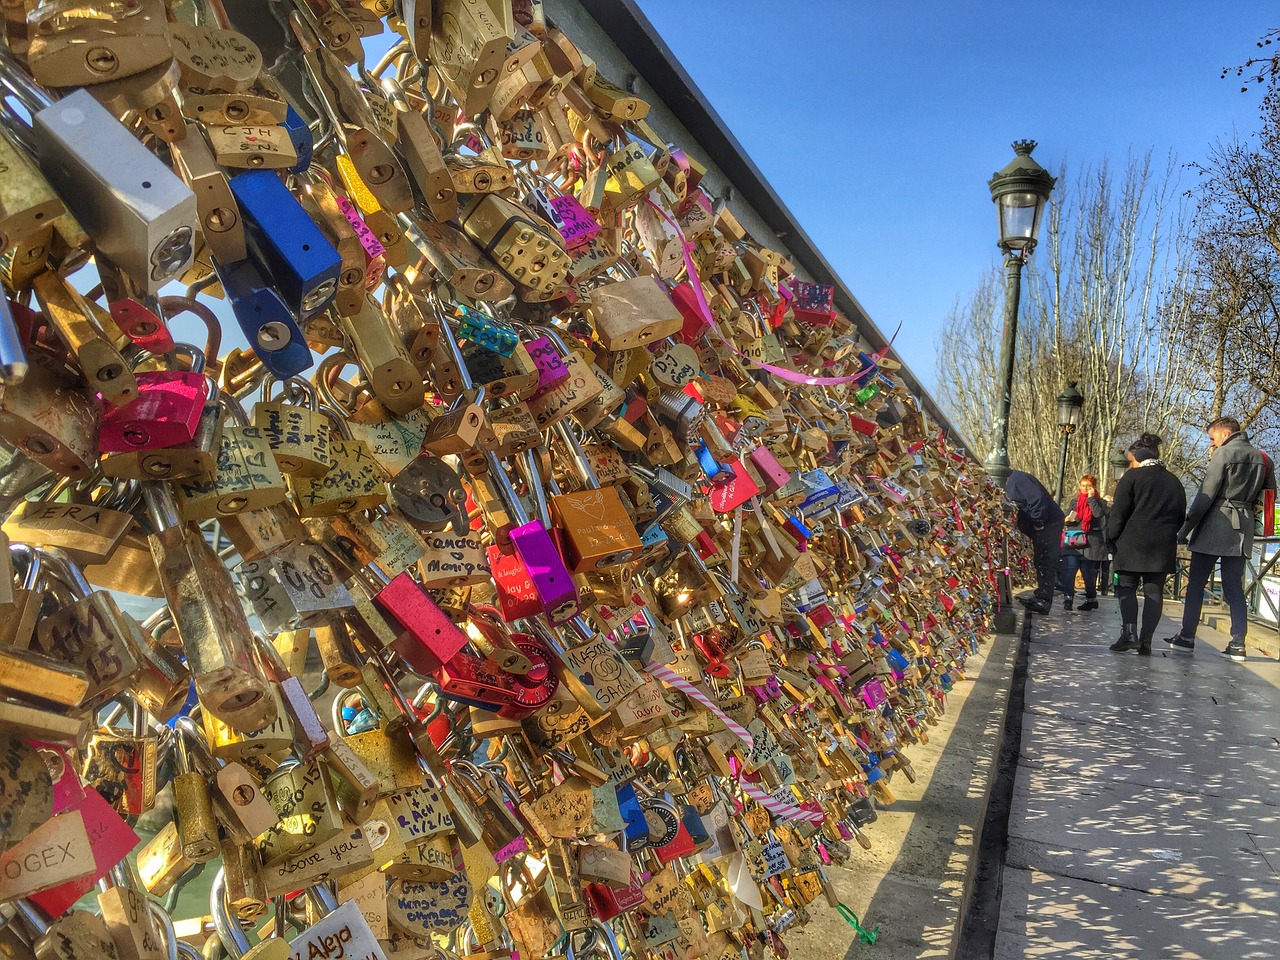 5 tips to Planning a Date while Visiting Paris